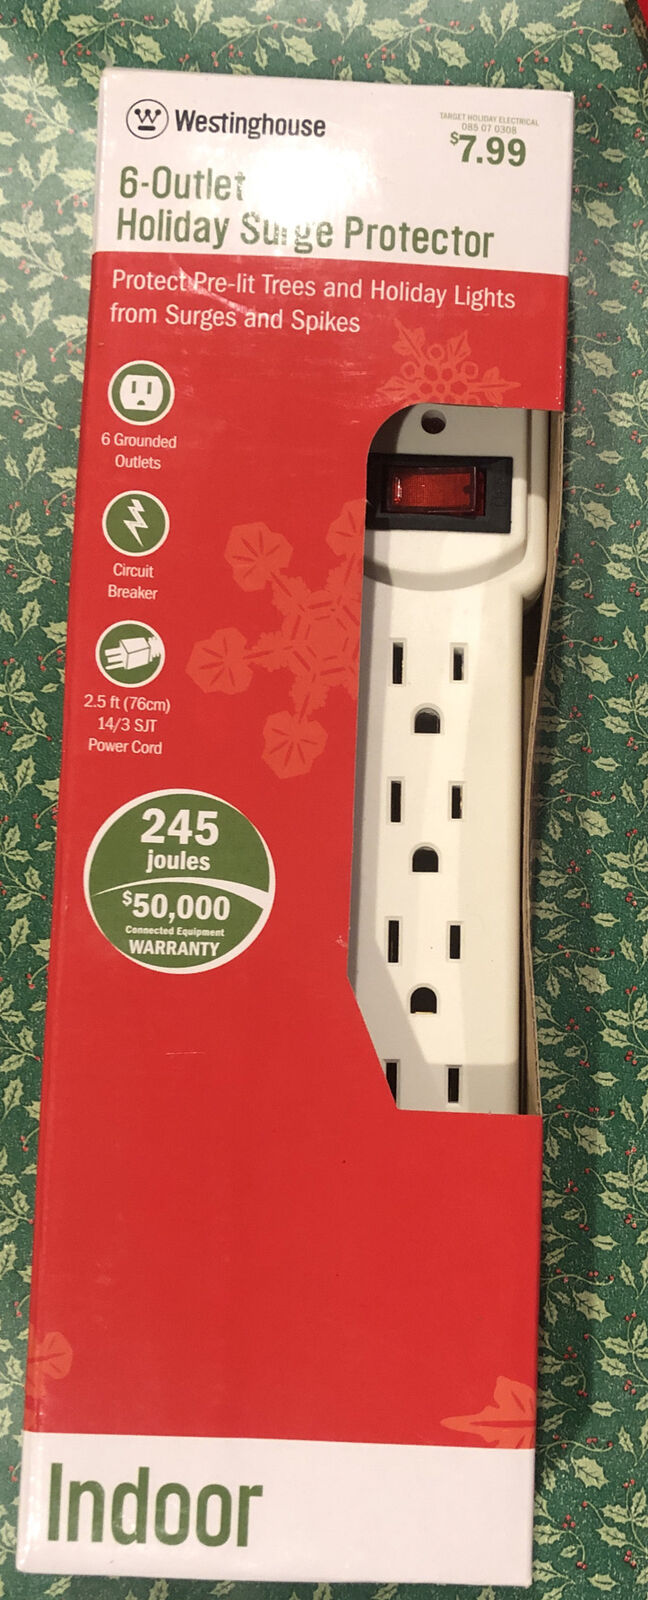 New Westinghouse 6 Grounded Outlet Holiday Surge Protector Indoor 2.5 ft Cord 